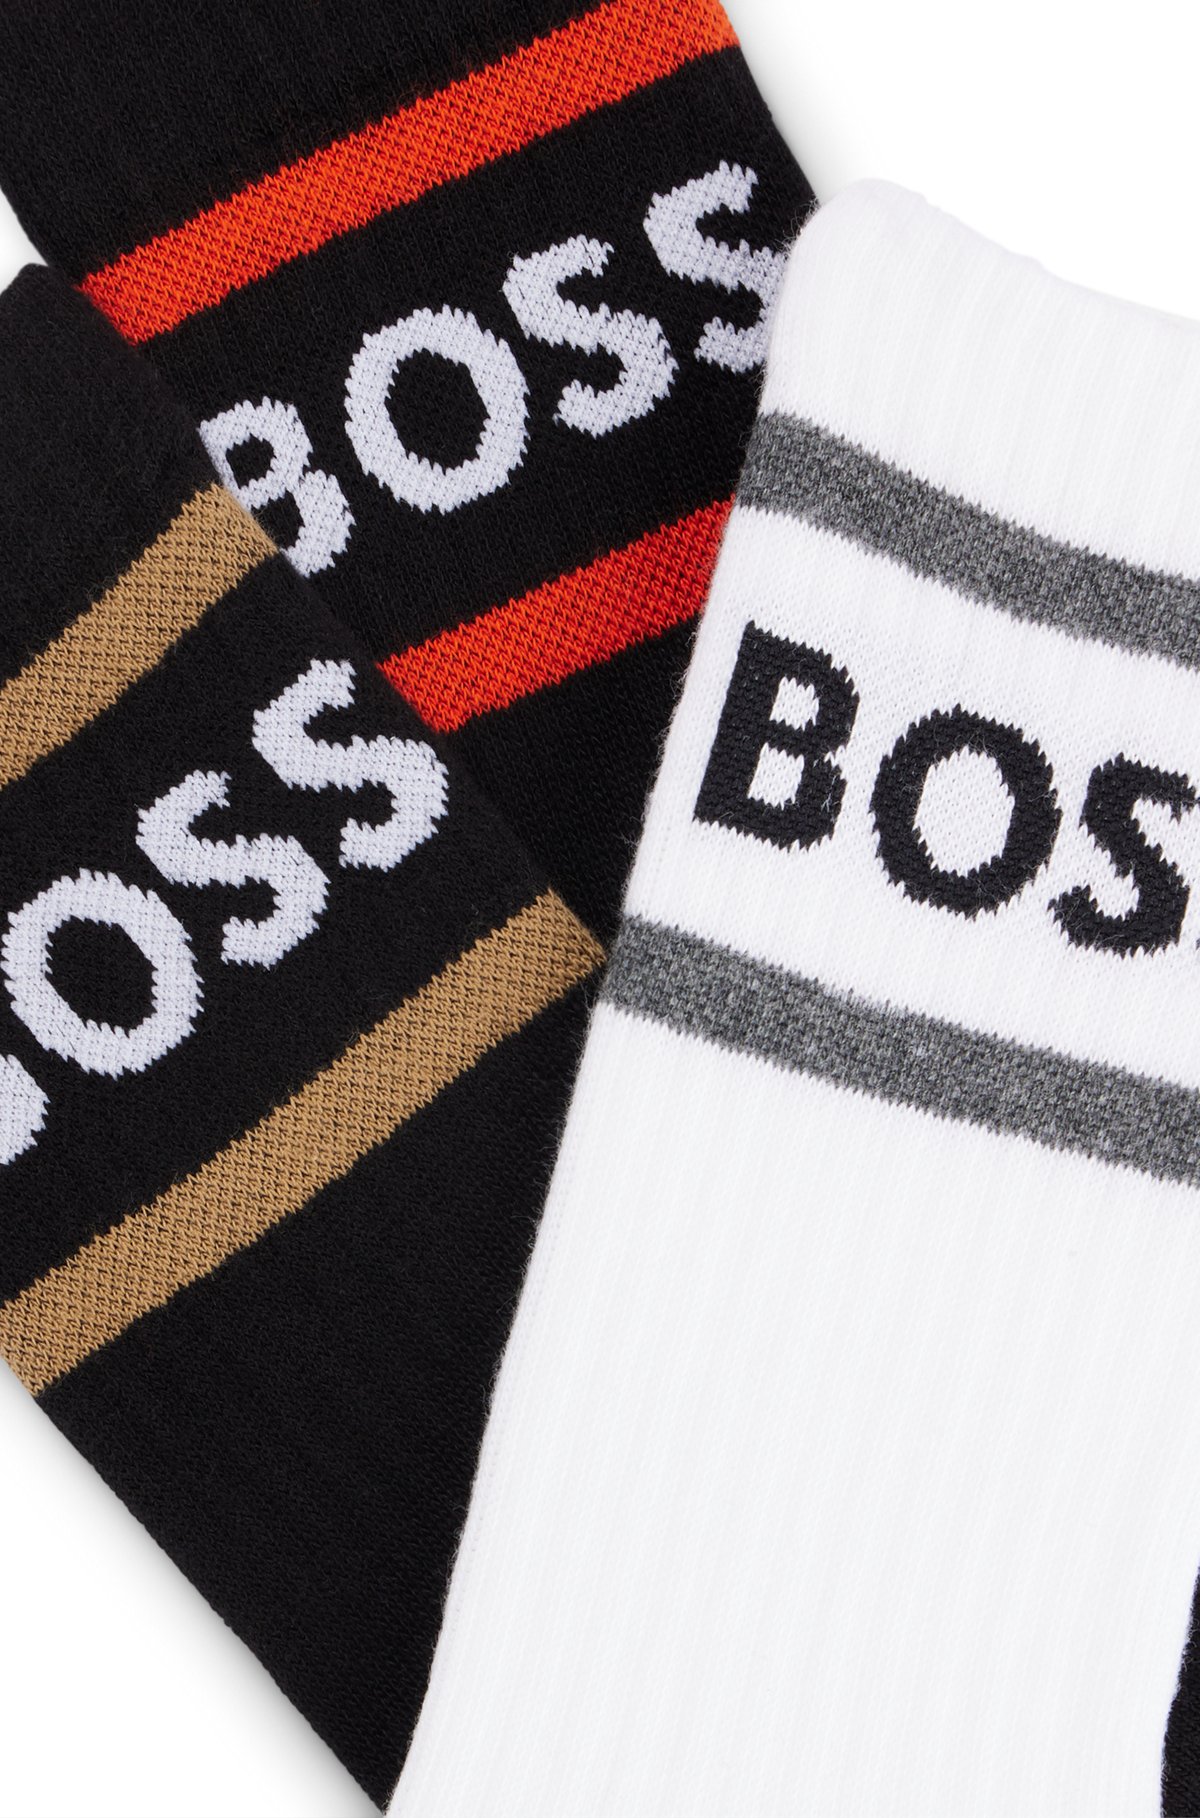 Three-pack of short socks with stripes and logo, Patterned